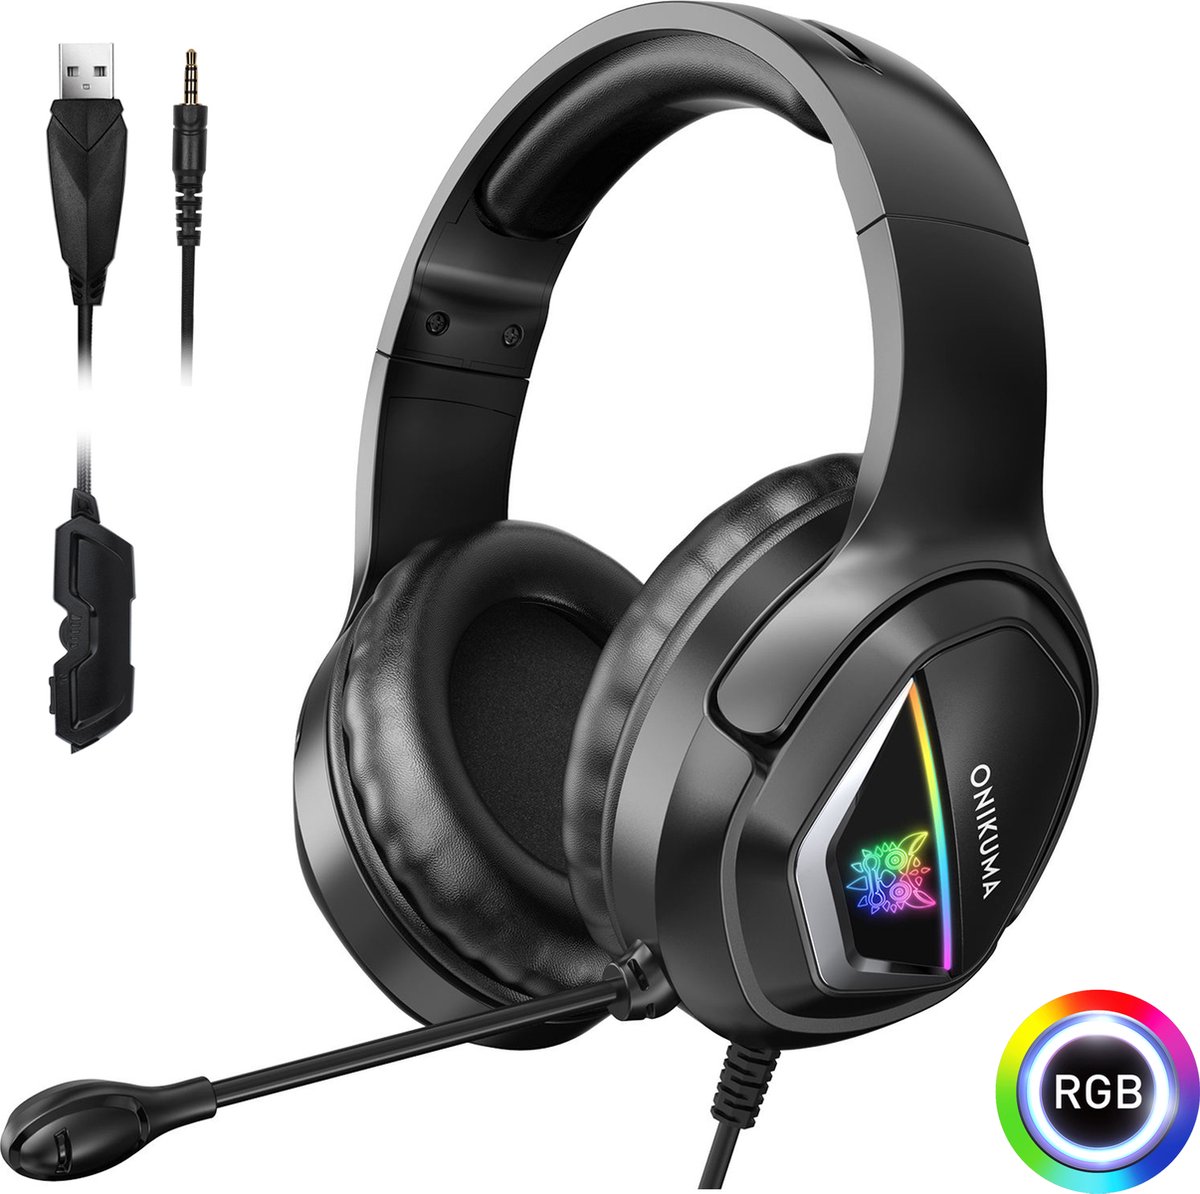 Gavury RGB X2 PRIME Koptelefoon - RGB led verlichting - Voor PS4 PS5 en XBOX One Gaming Hoofdtelefoon - Professionele Gaming Headset - Surround Sound & Noise cancelling headset